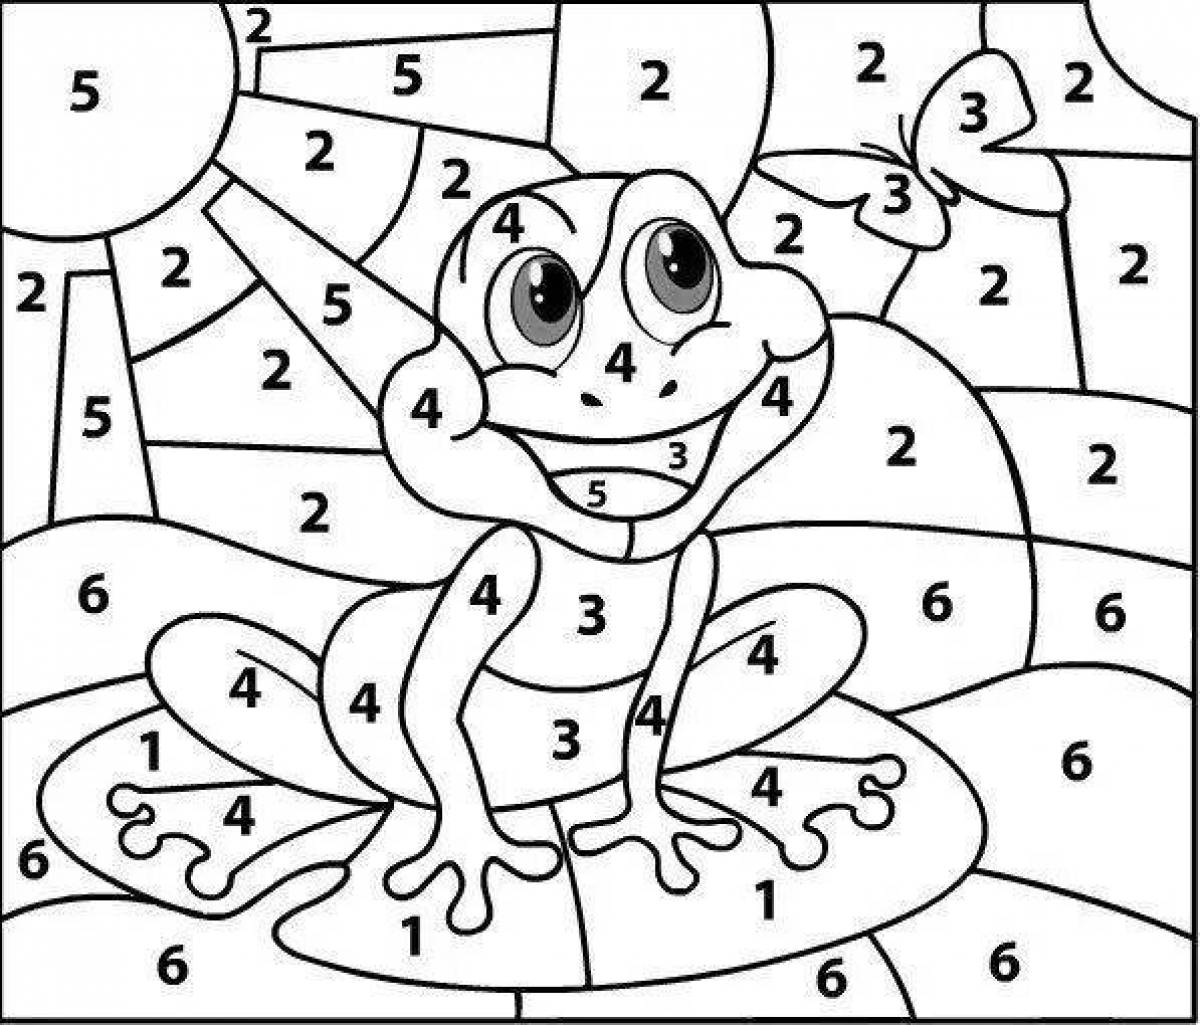 Fascinating game by numbers phone coloring book